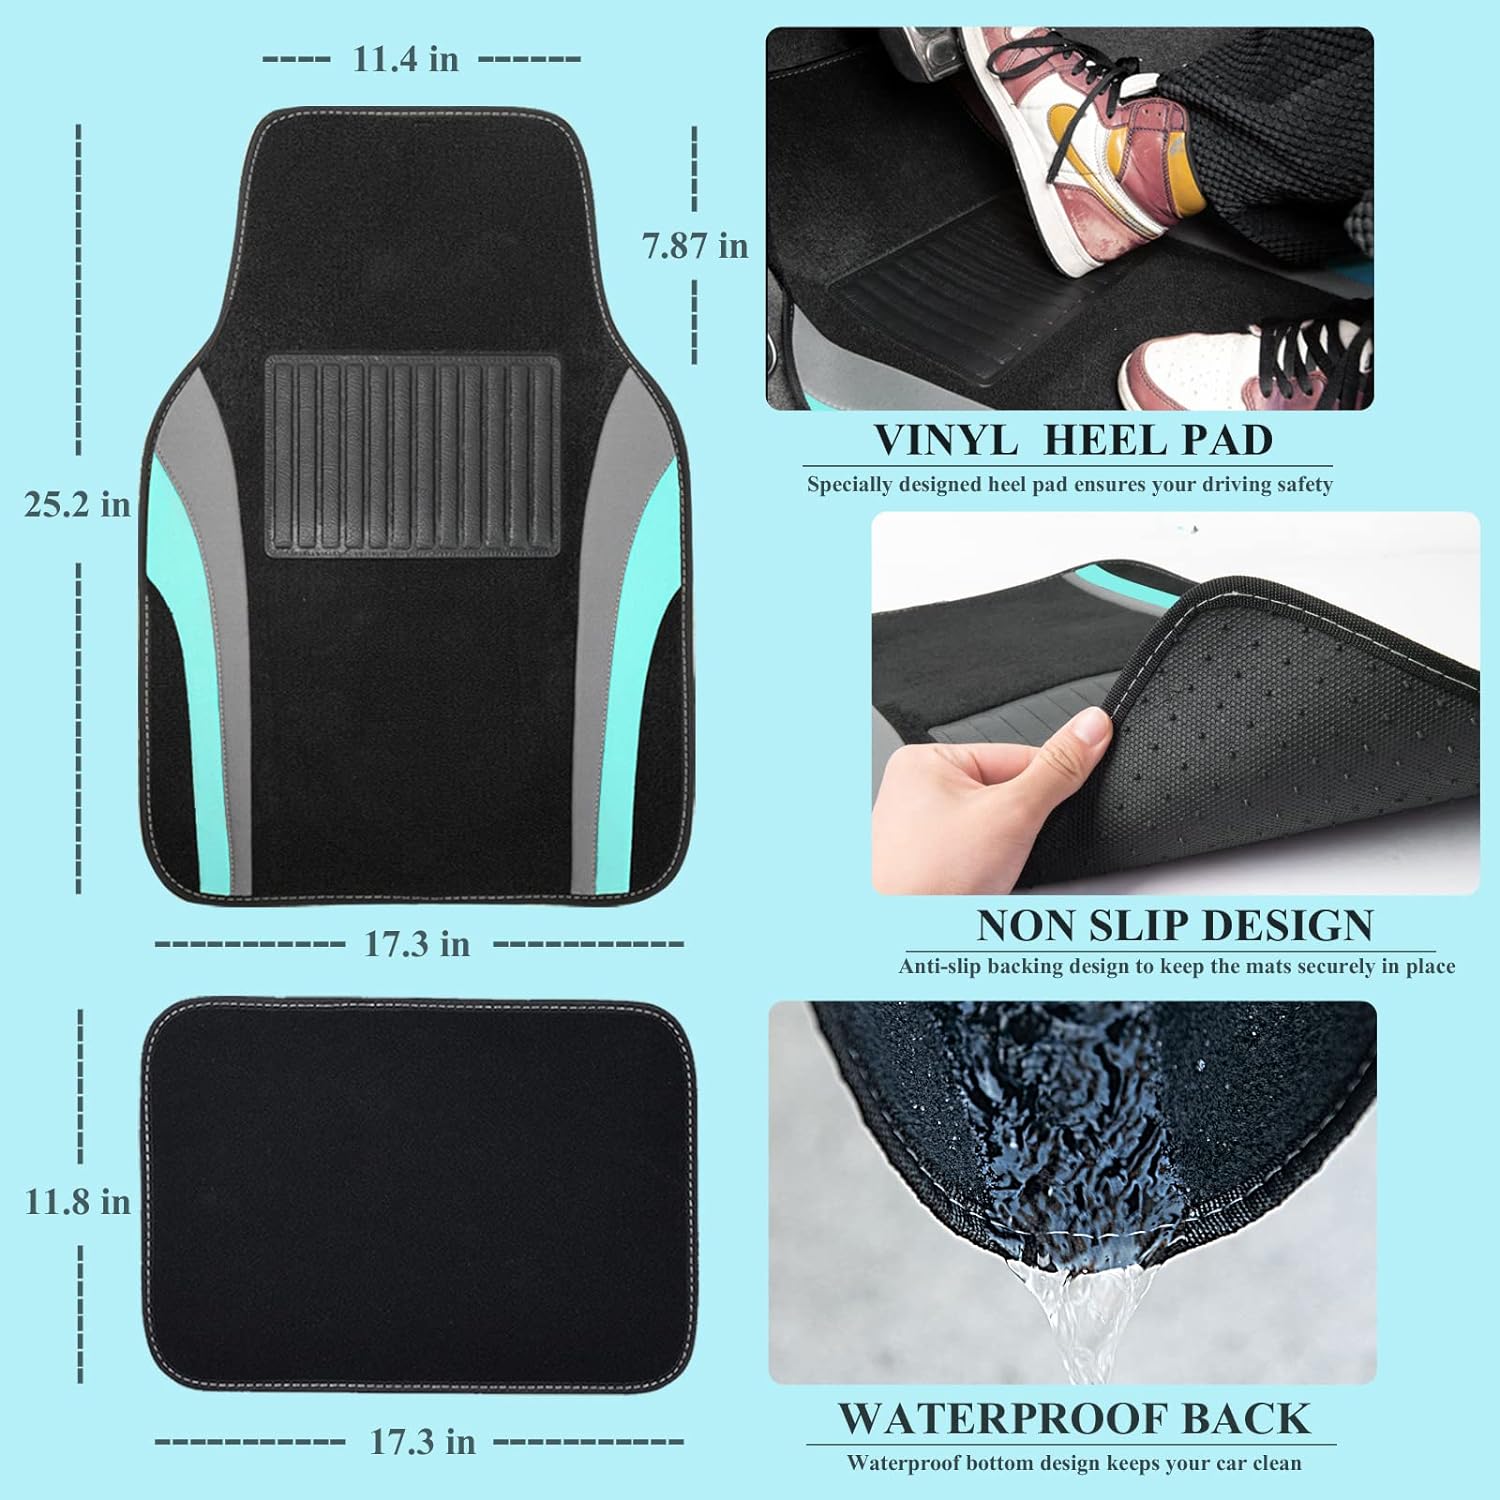 CAR PASS Line Rider Sporty Car Seat Covers Full Set with 4Pcs Waterproof Car Floor Mats Universal Fit Airbag Compatible Automotive Interior Covers for Sedans, Trucks,Vans,SUV (Combo Set, Black & Gray)